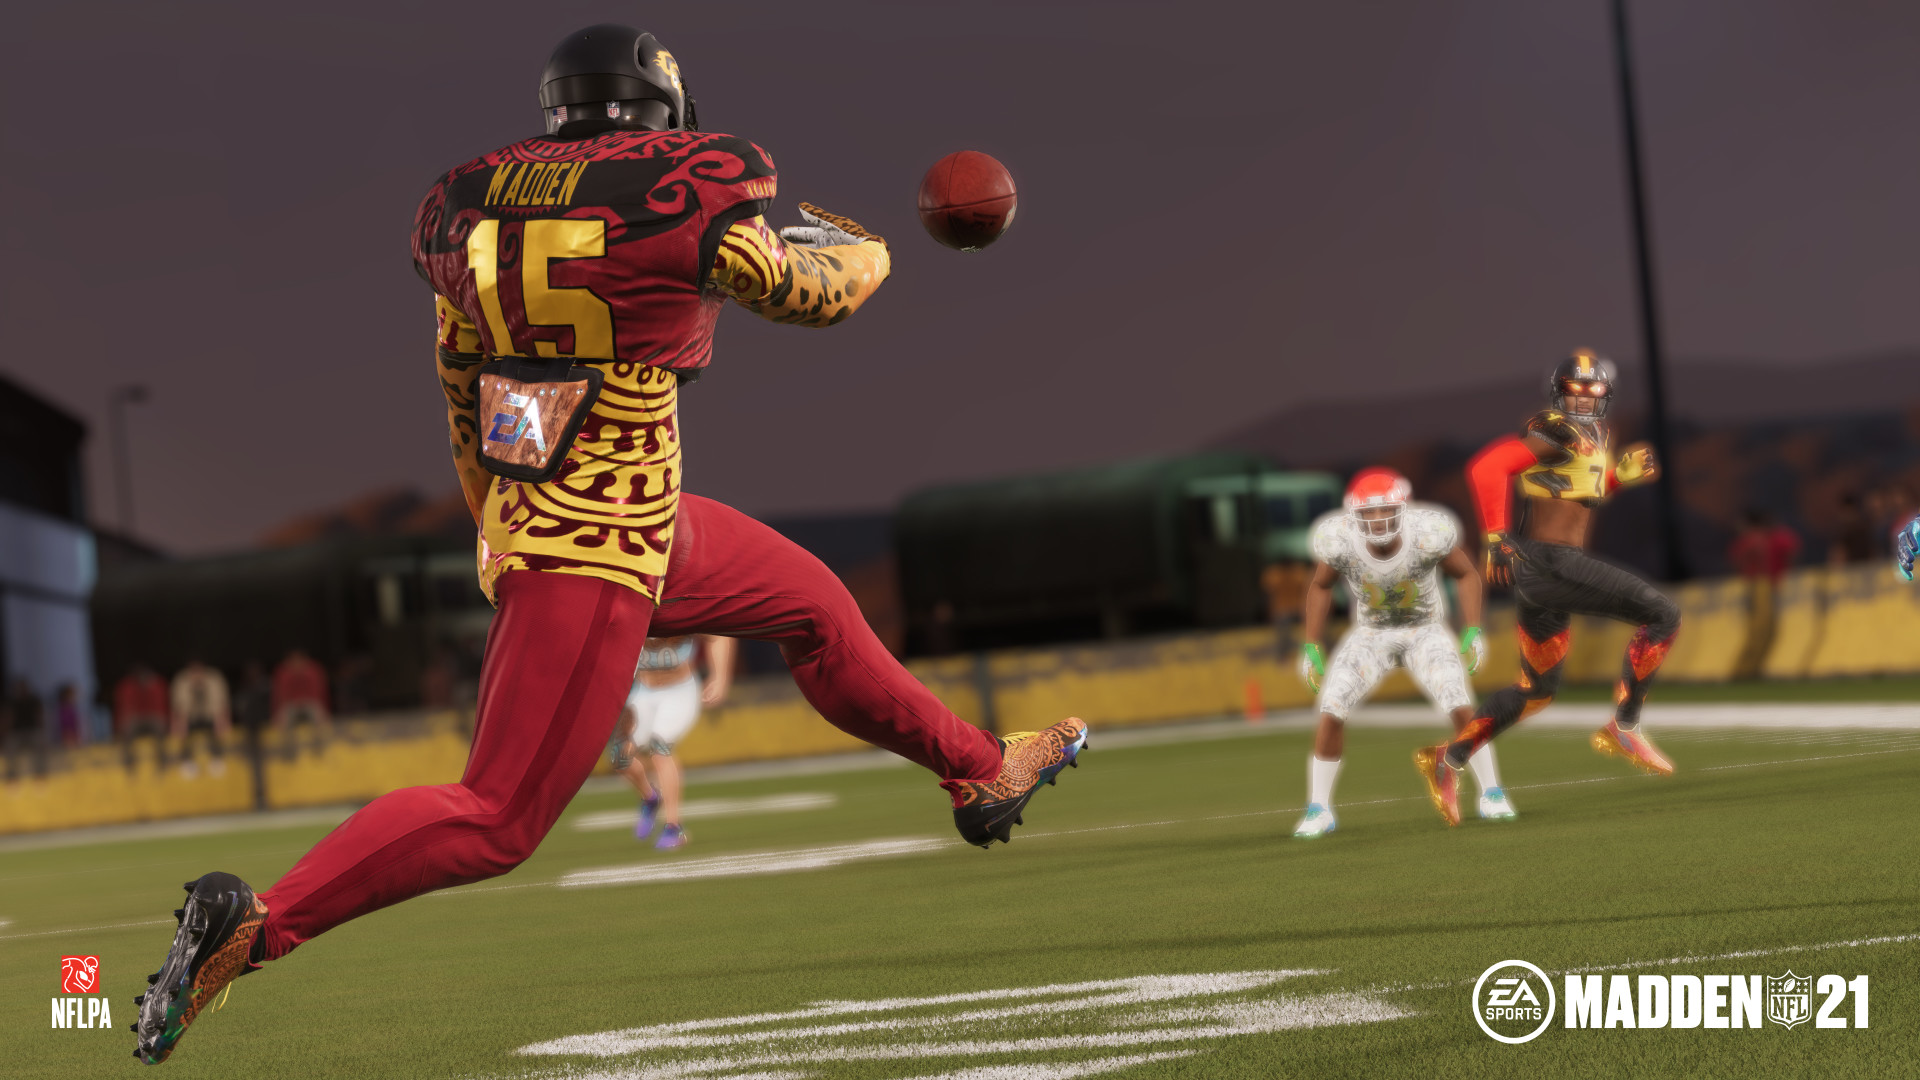 Madden Nfl 21 Game Debuts Brand New The Yard Mode Complex